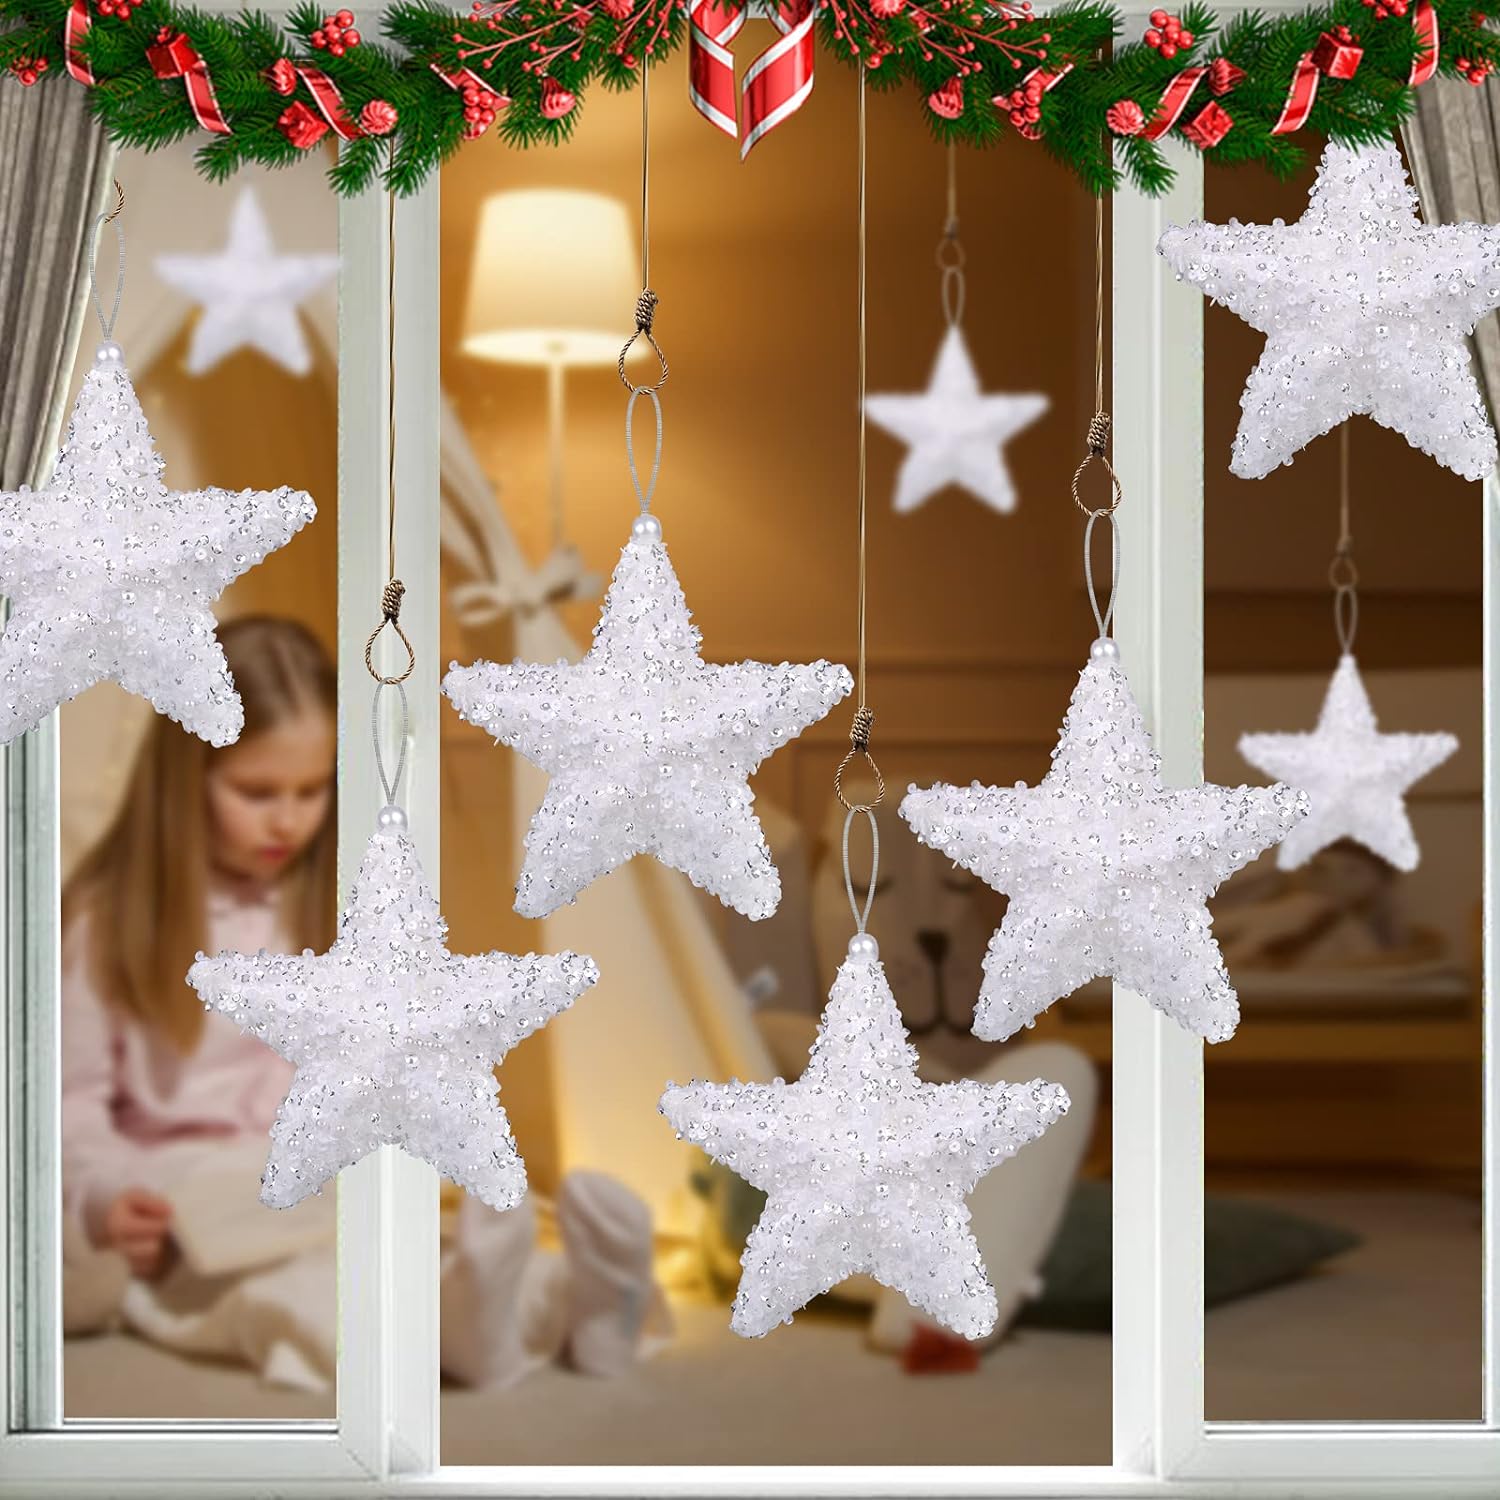 thinkstar 6" Five-Pointed Star Christmas Ornaments,4Pc Set White Christmas Decorations Star For Xmas Trees Hanging Ornaments, Wedding…